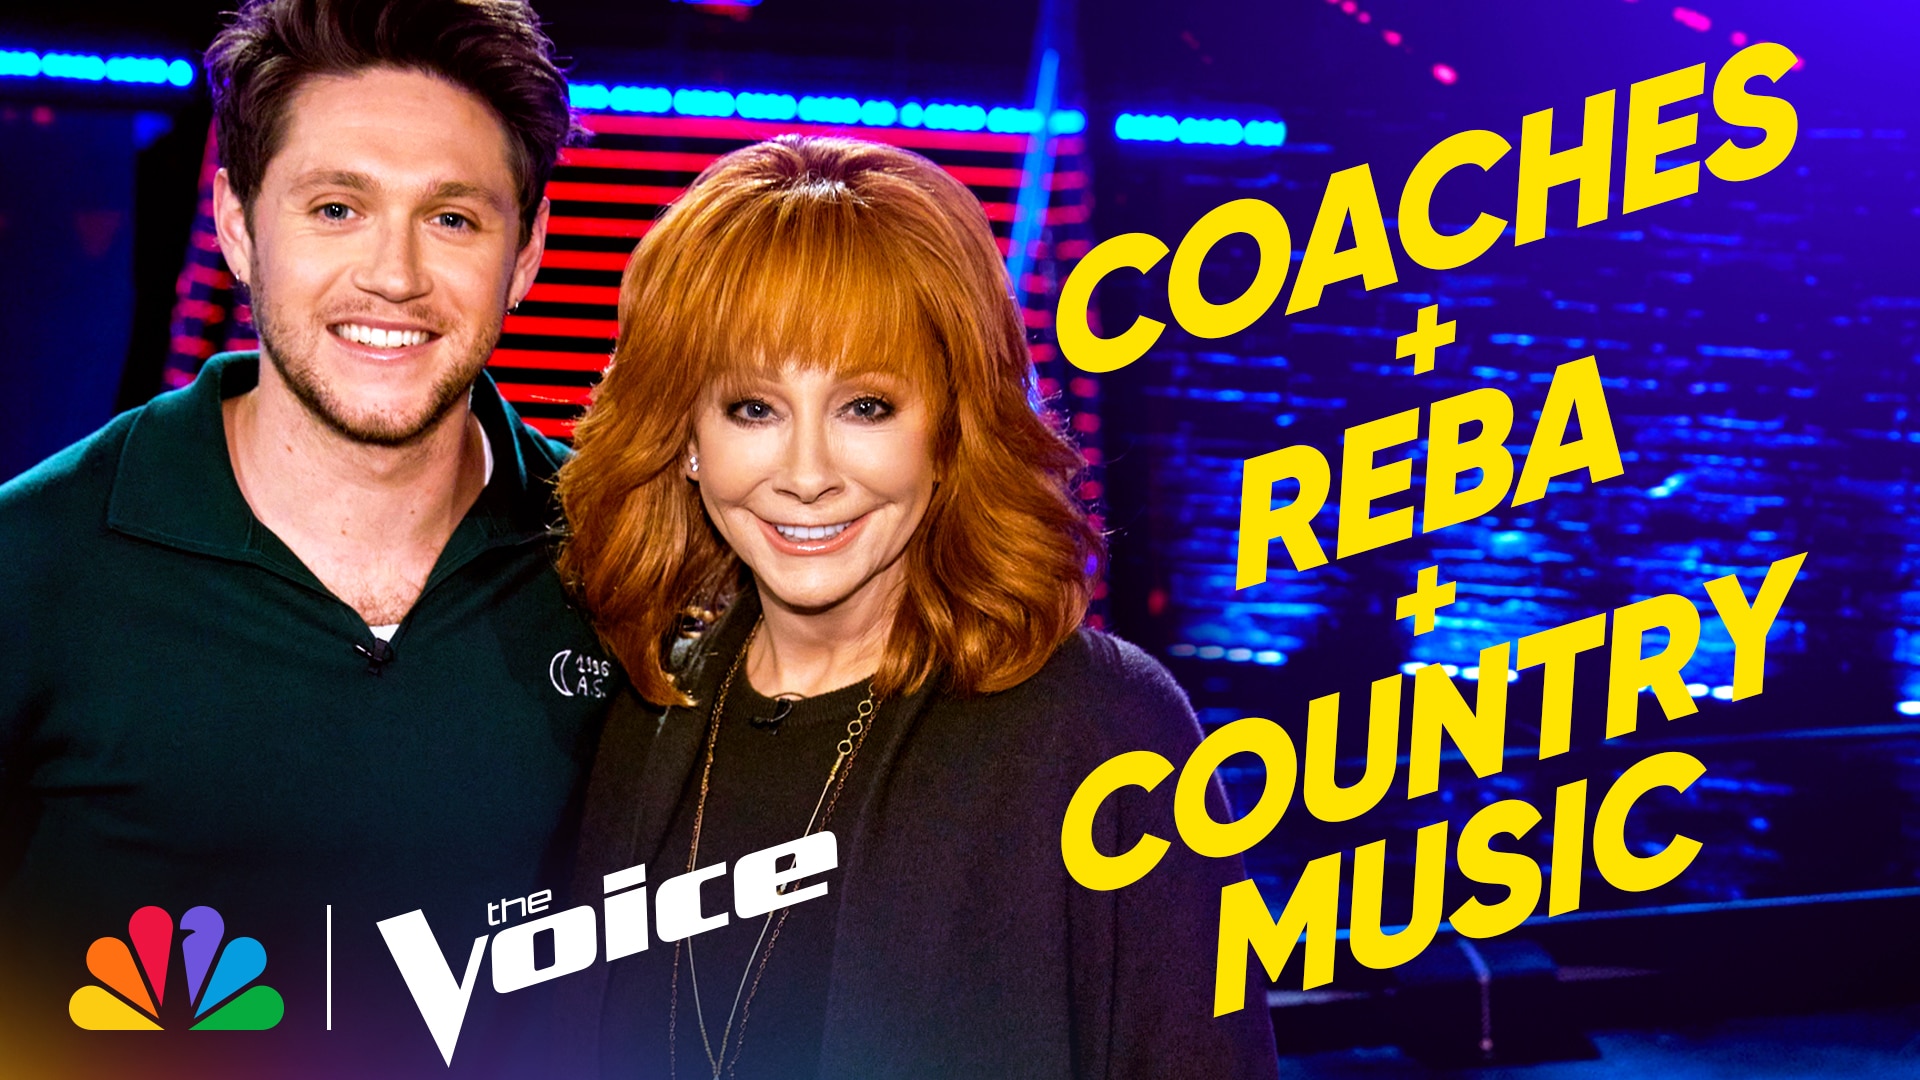 Watch The Voice Web Exclusive Coaches Chance, Kelly, Niall and Blake